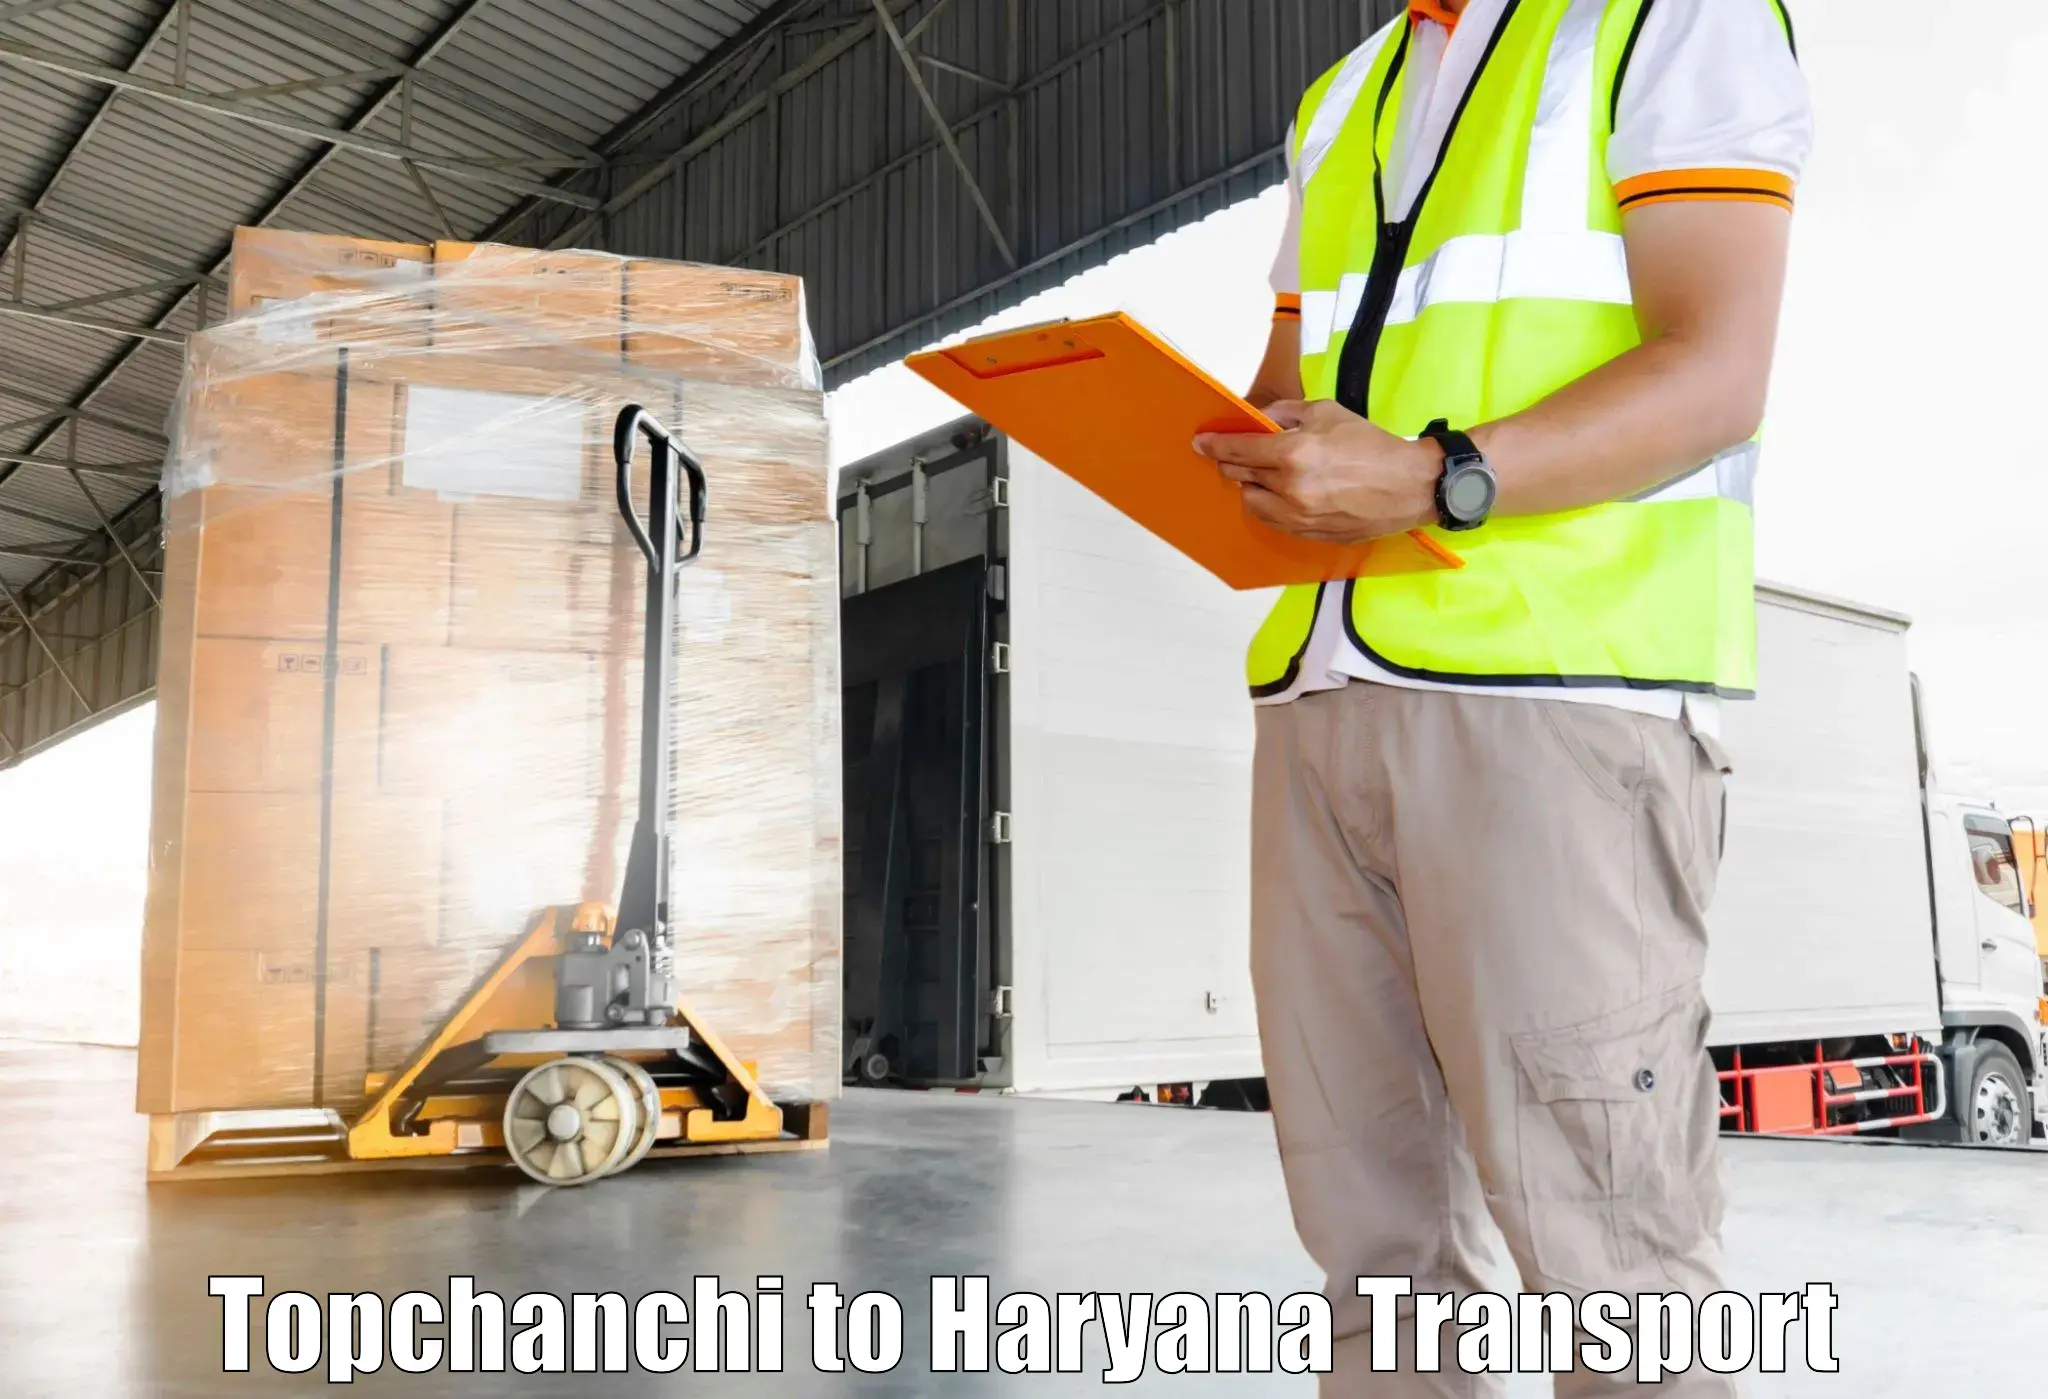 Air freight transport services Topchanchi to Karnal